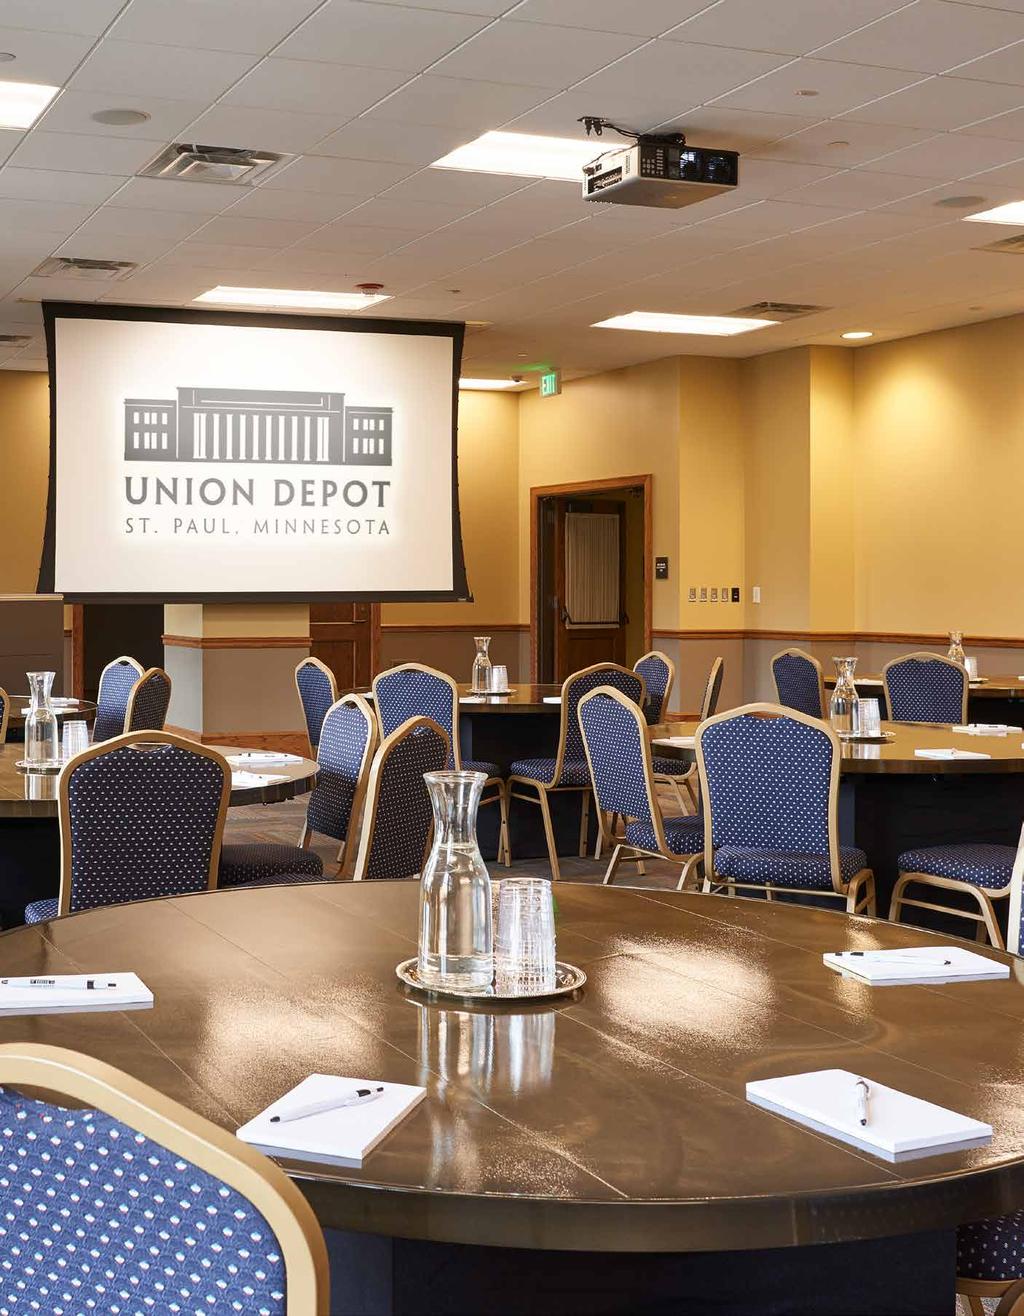 GATEWAY CONFERENCE ROOM Union Depot once again is serving as a gateway for travelers and event goers.